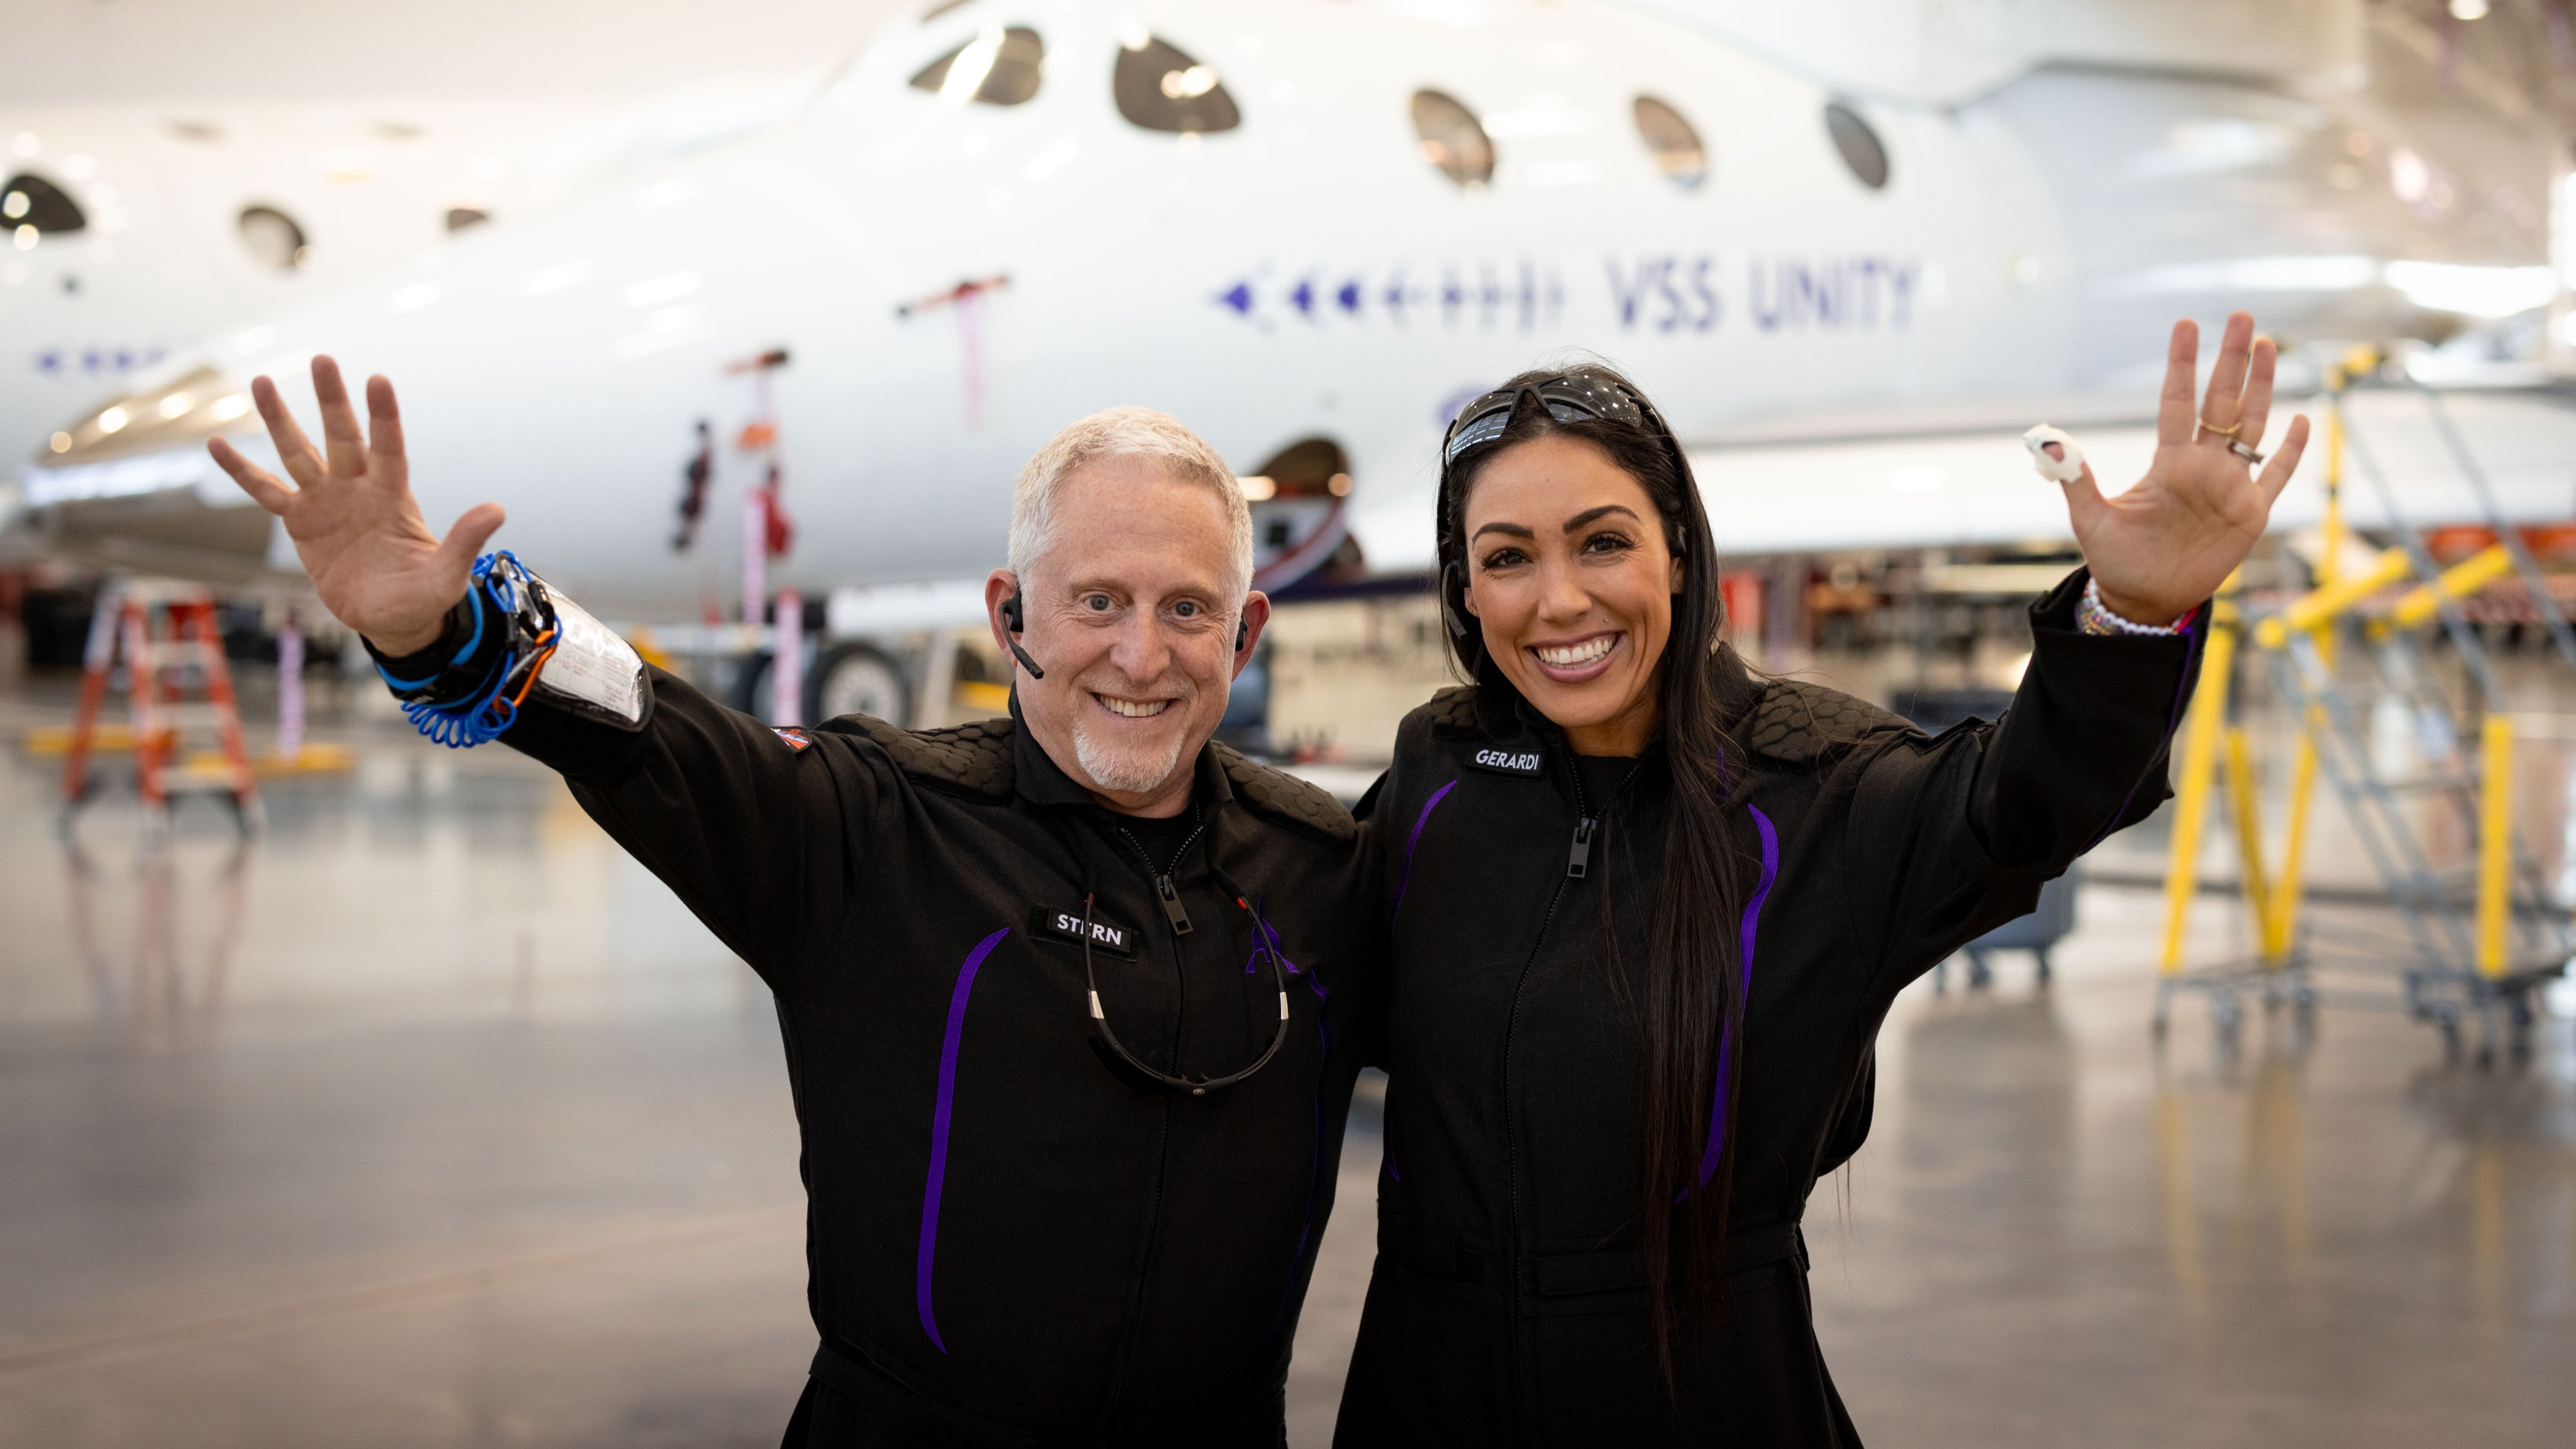 Virgin Galactic set to launch Galactic 05 mission with research duo on Nov. 2 Space